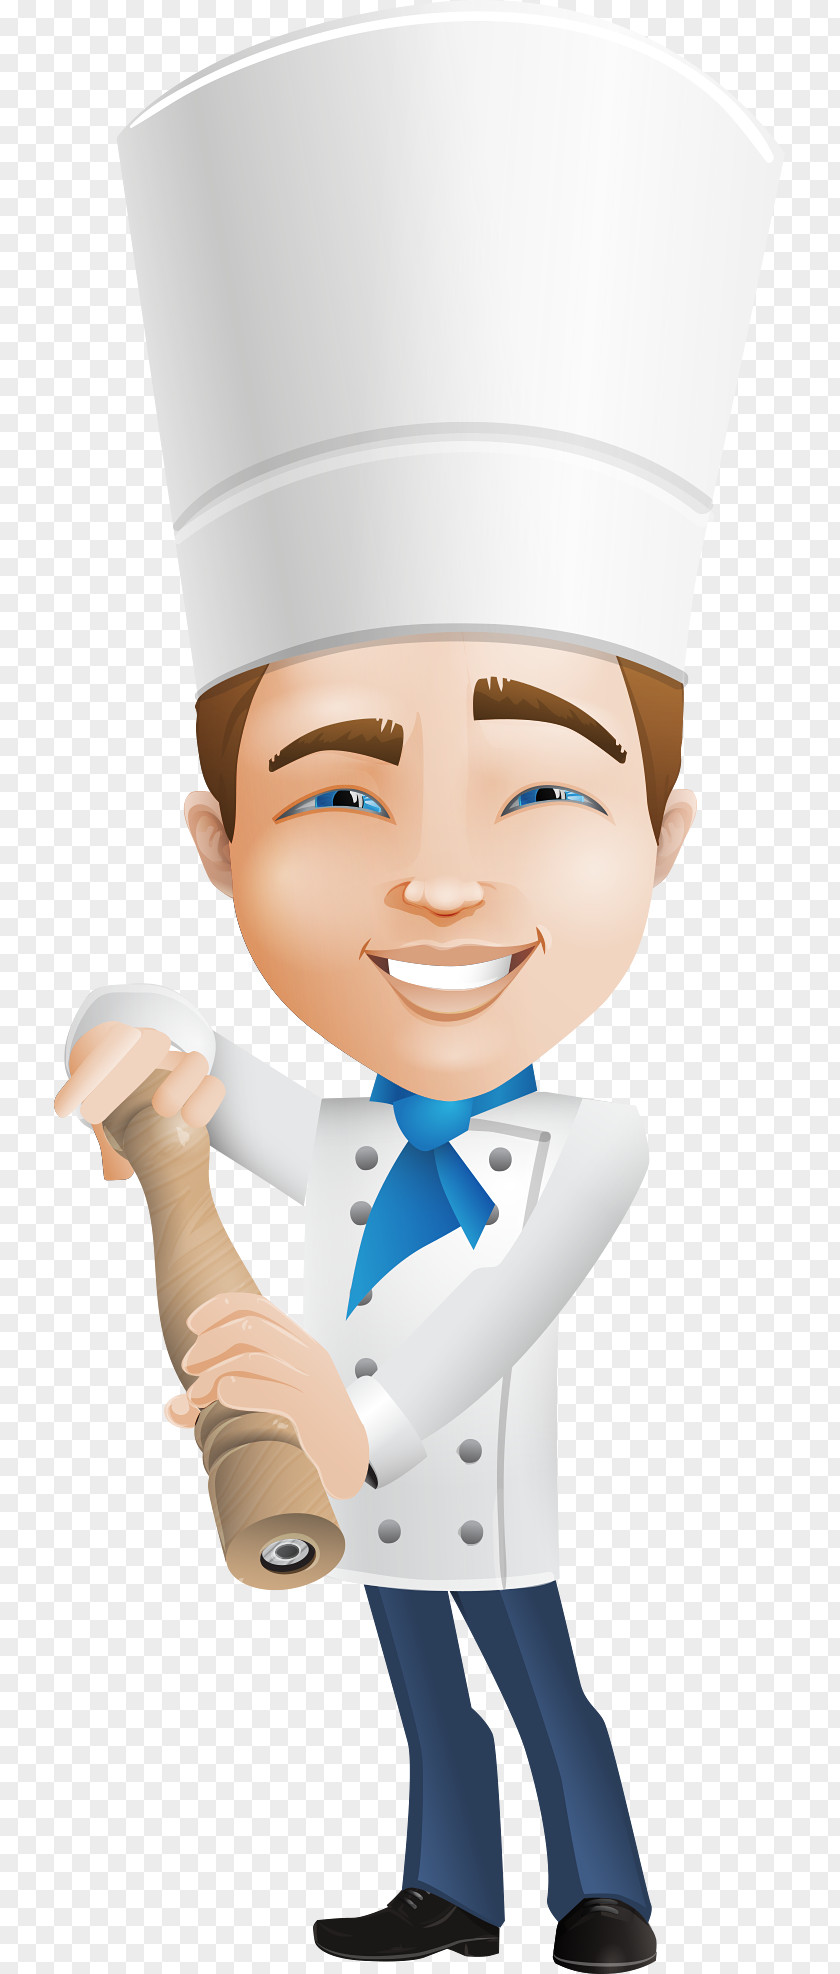 Cartoon Chef Wearing A Chef's Hat Character PNG